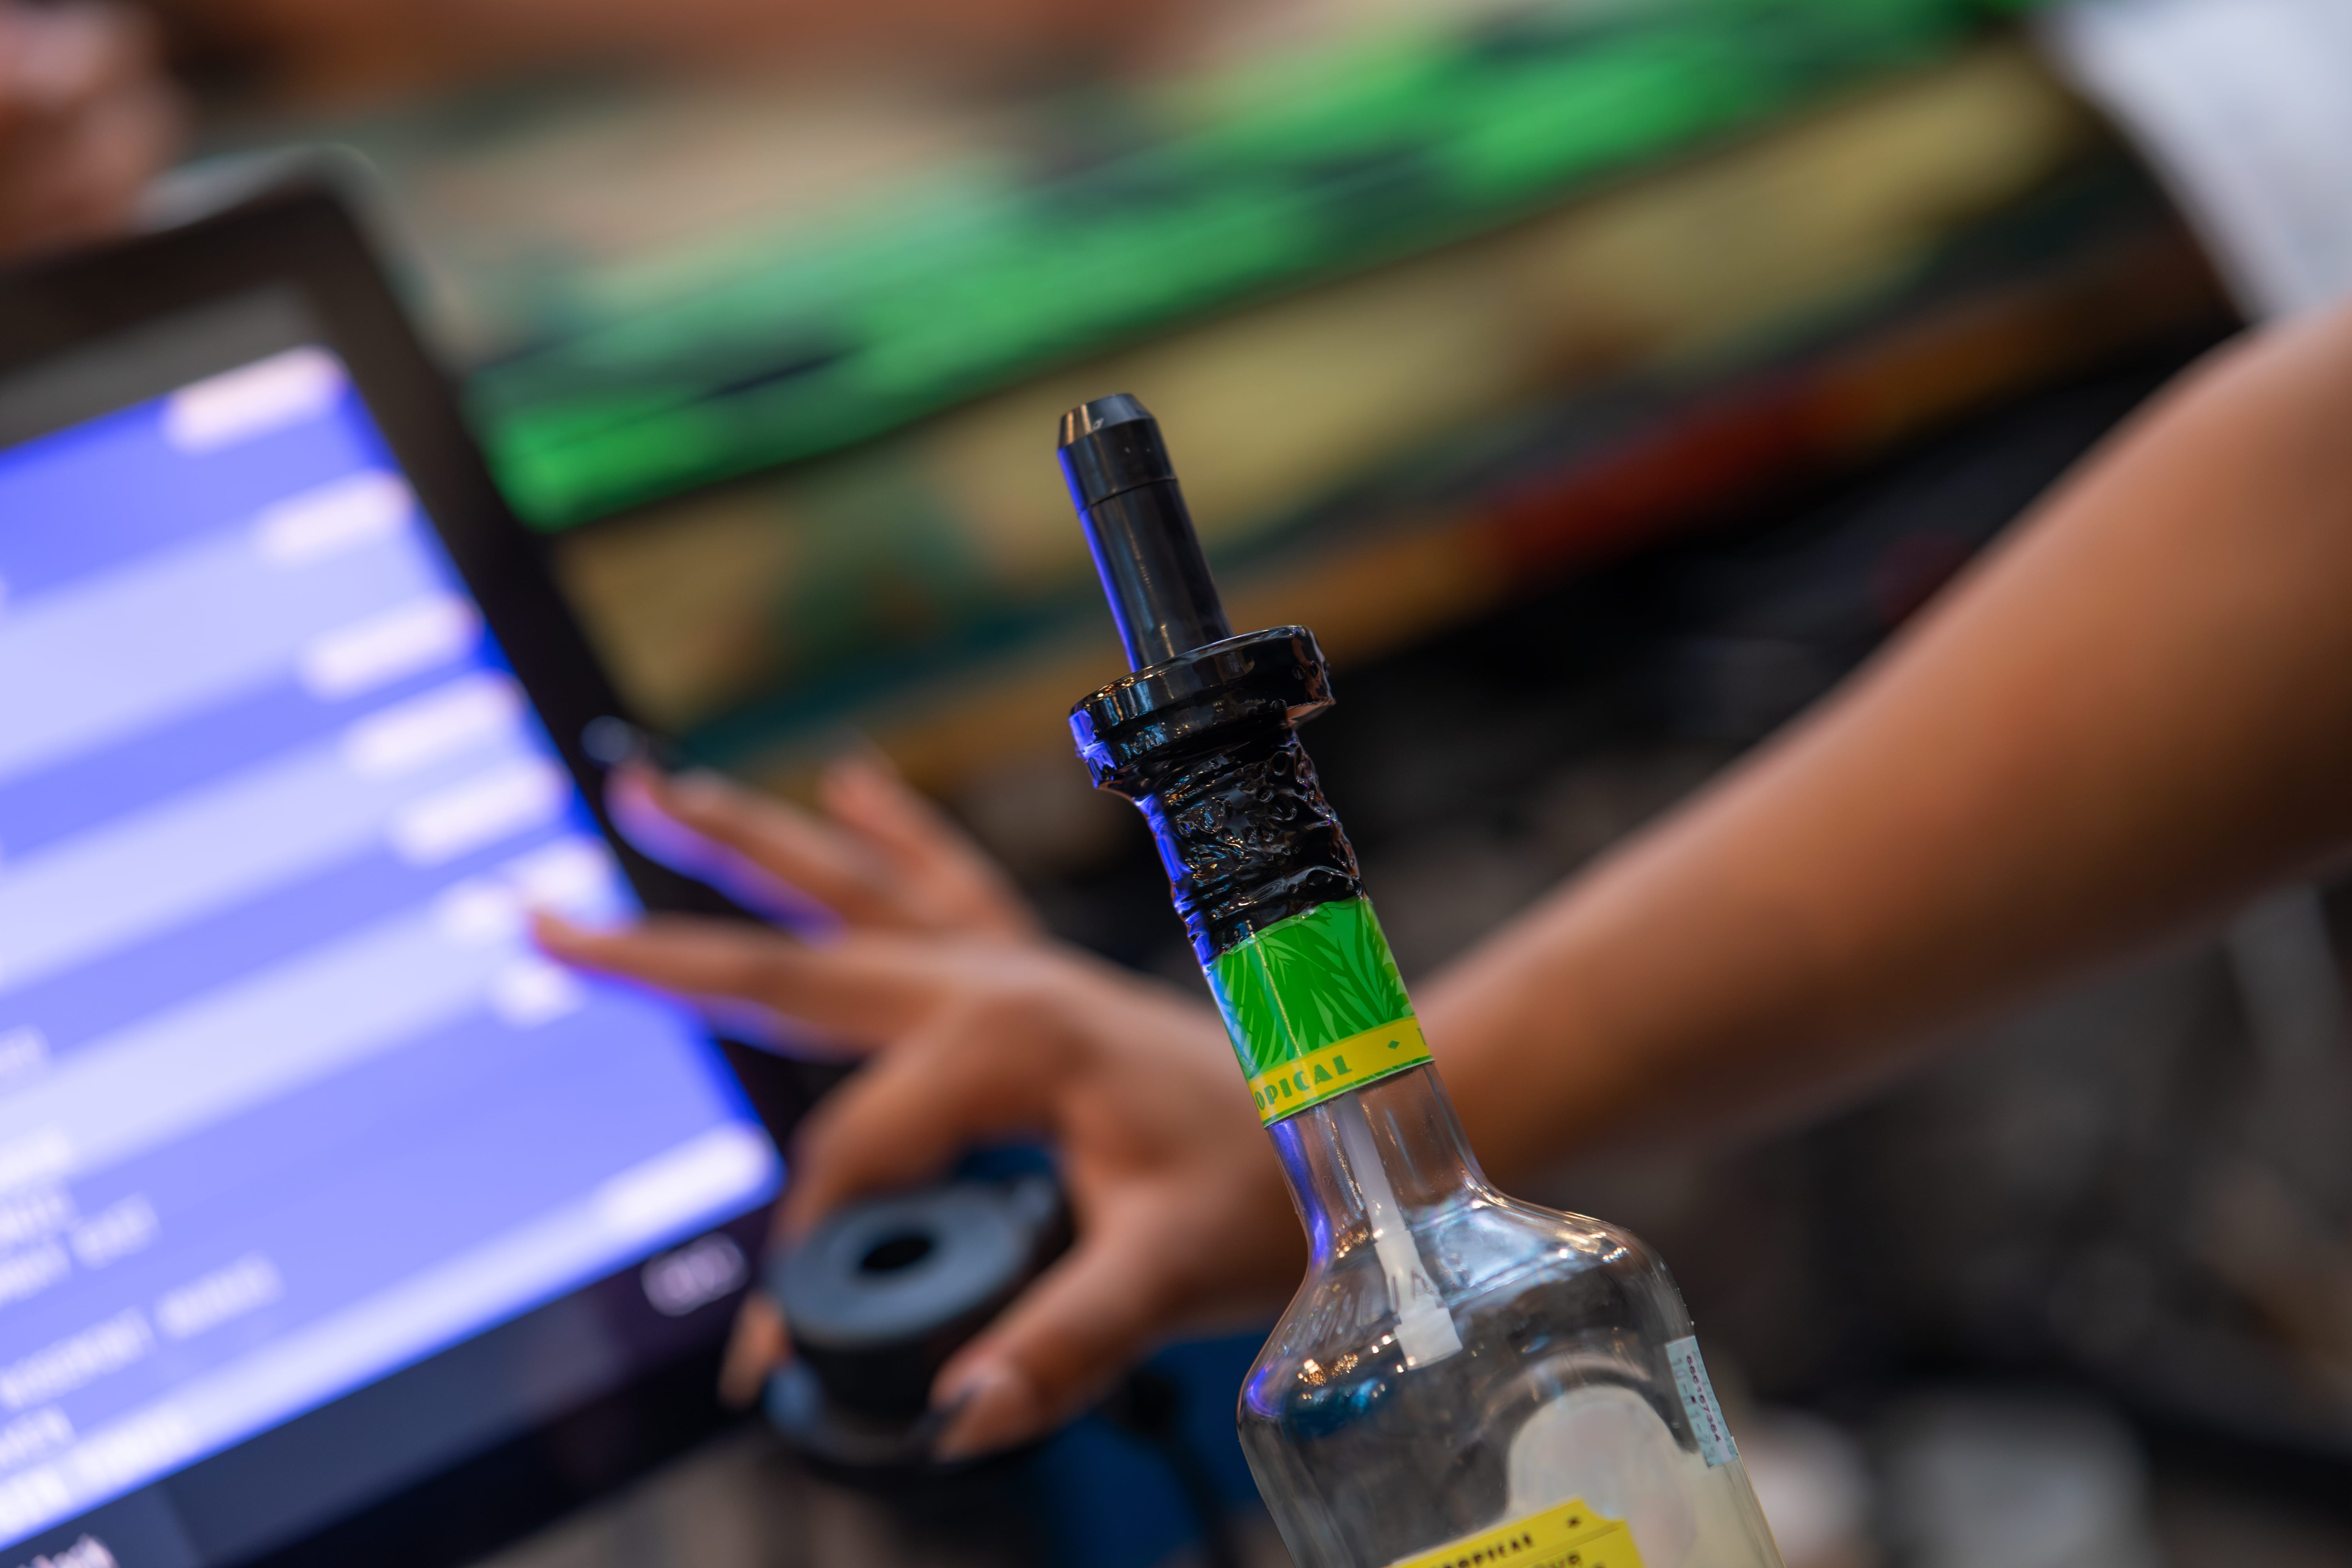 The VelMix system in action with its handheld device connected to a bottle, monitored through an integrated POS interface in the background.